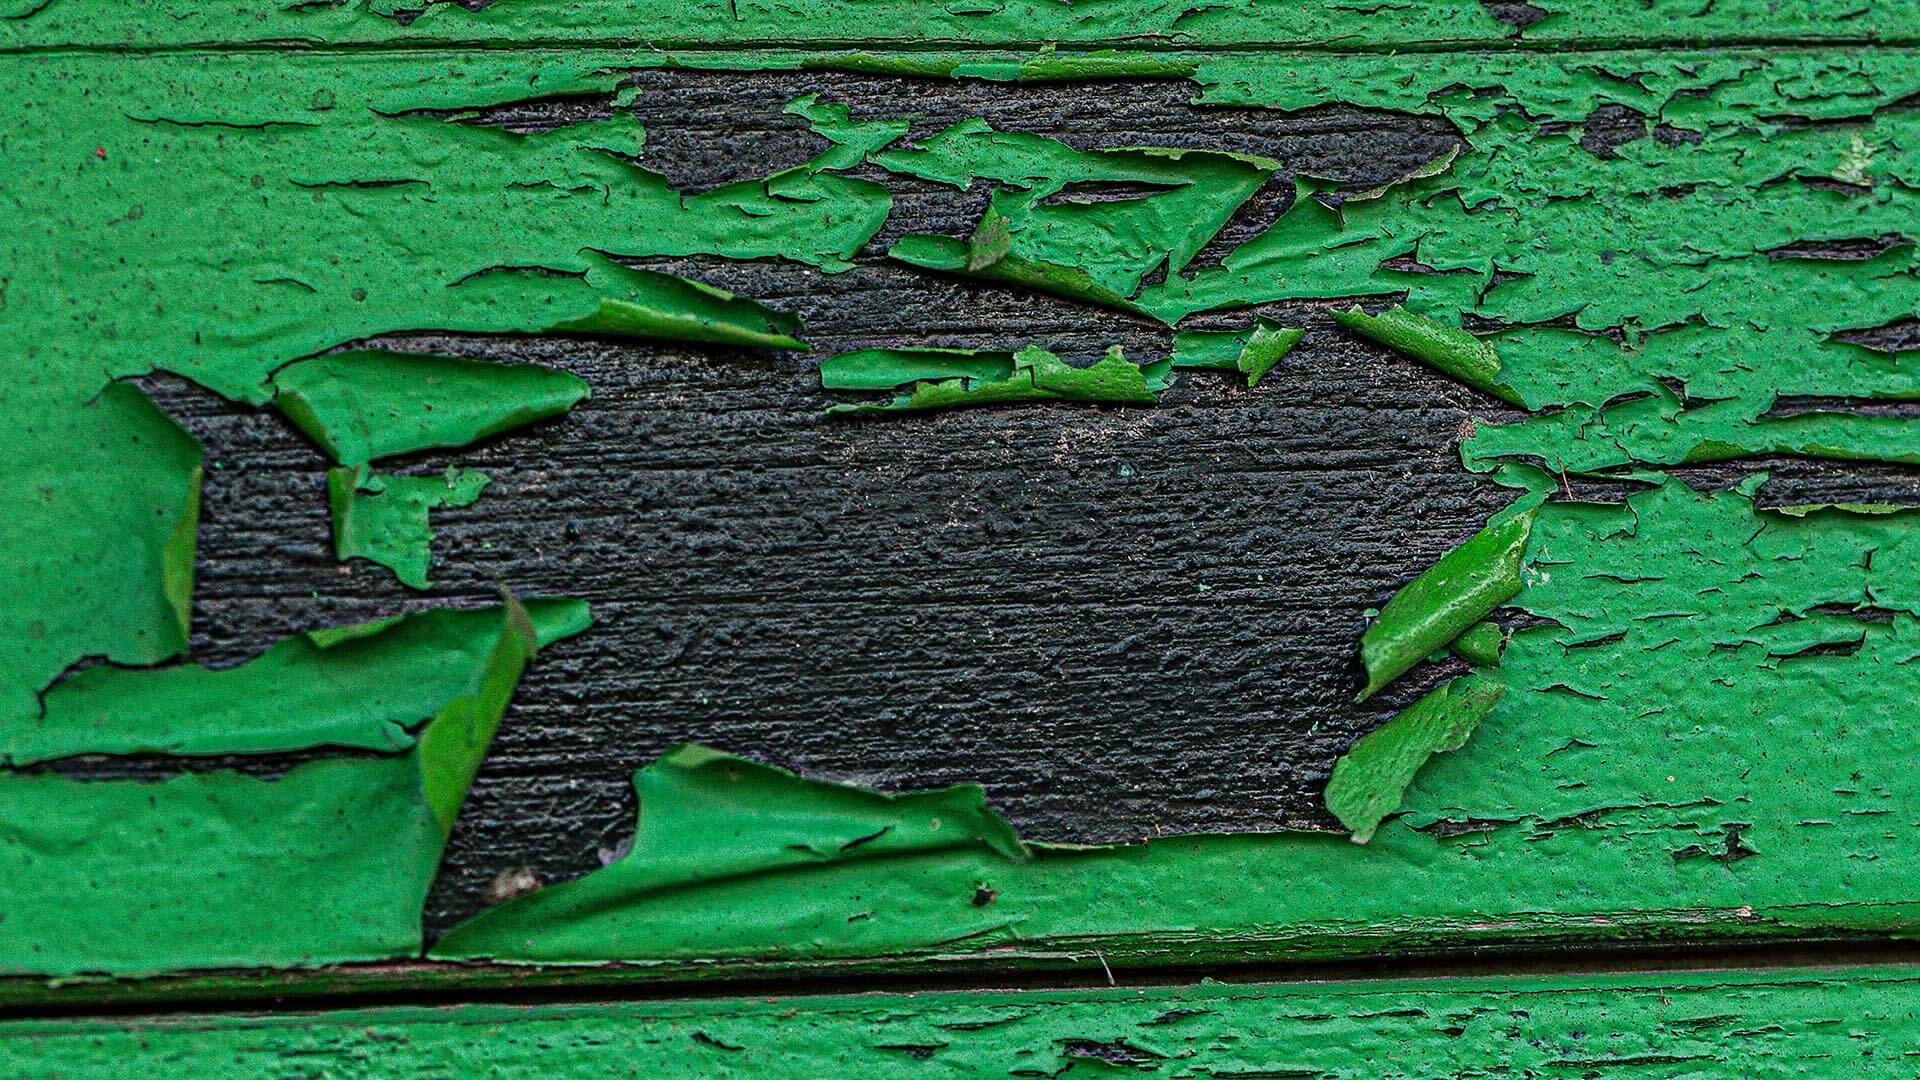 Chipping green paint symbolizes the practice of greenwashing